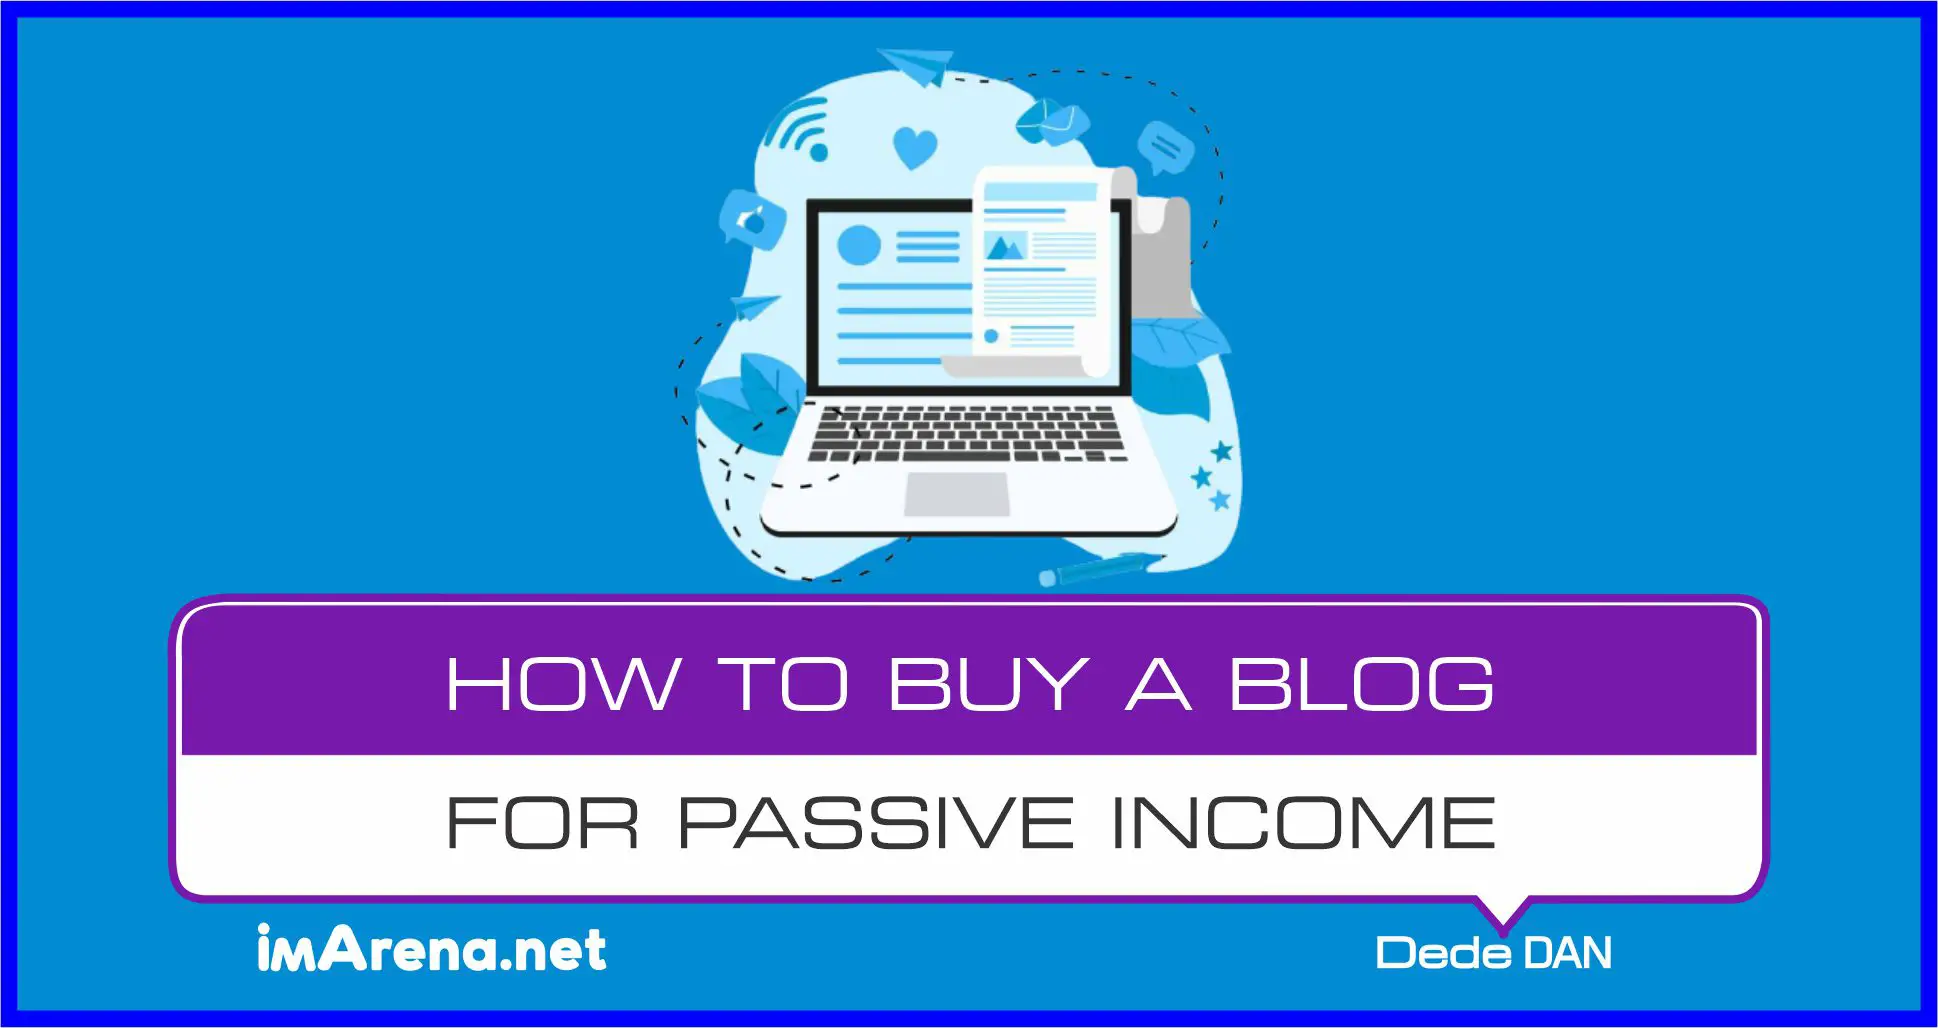 How To Buy a Blog for Passive Income